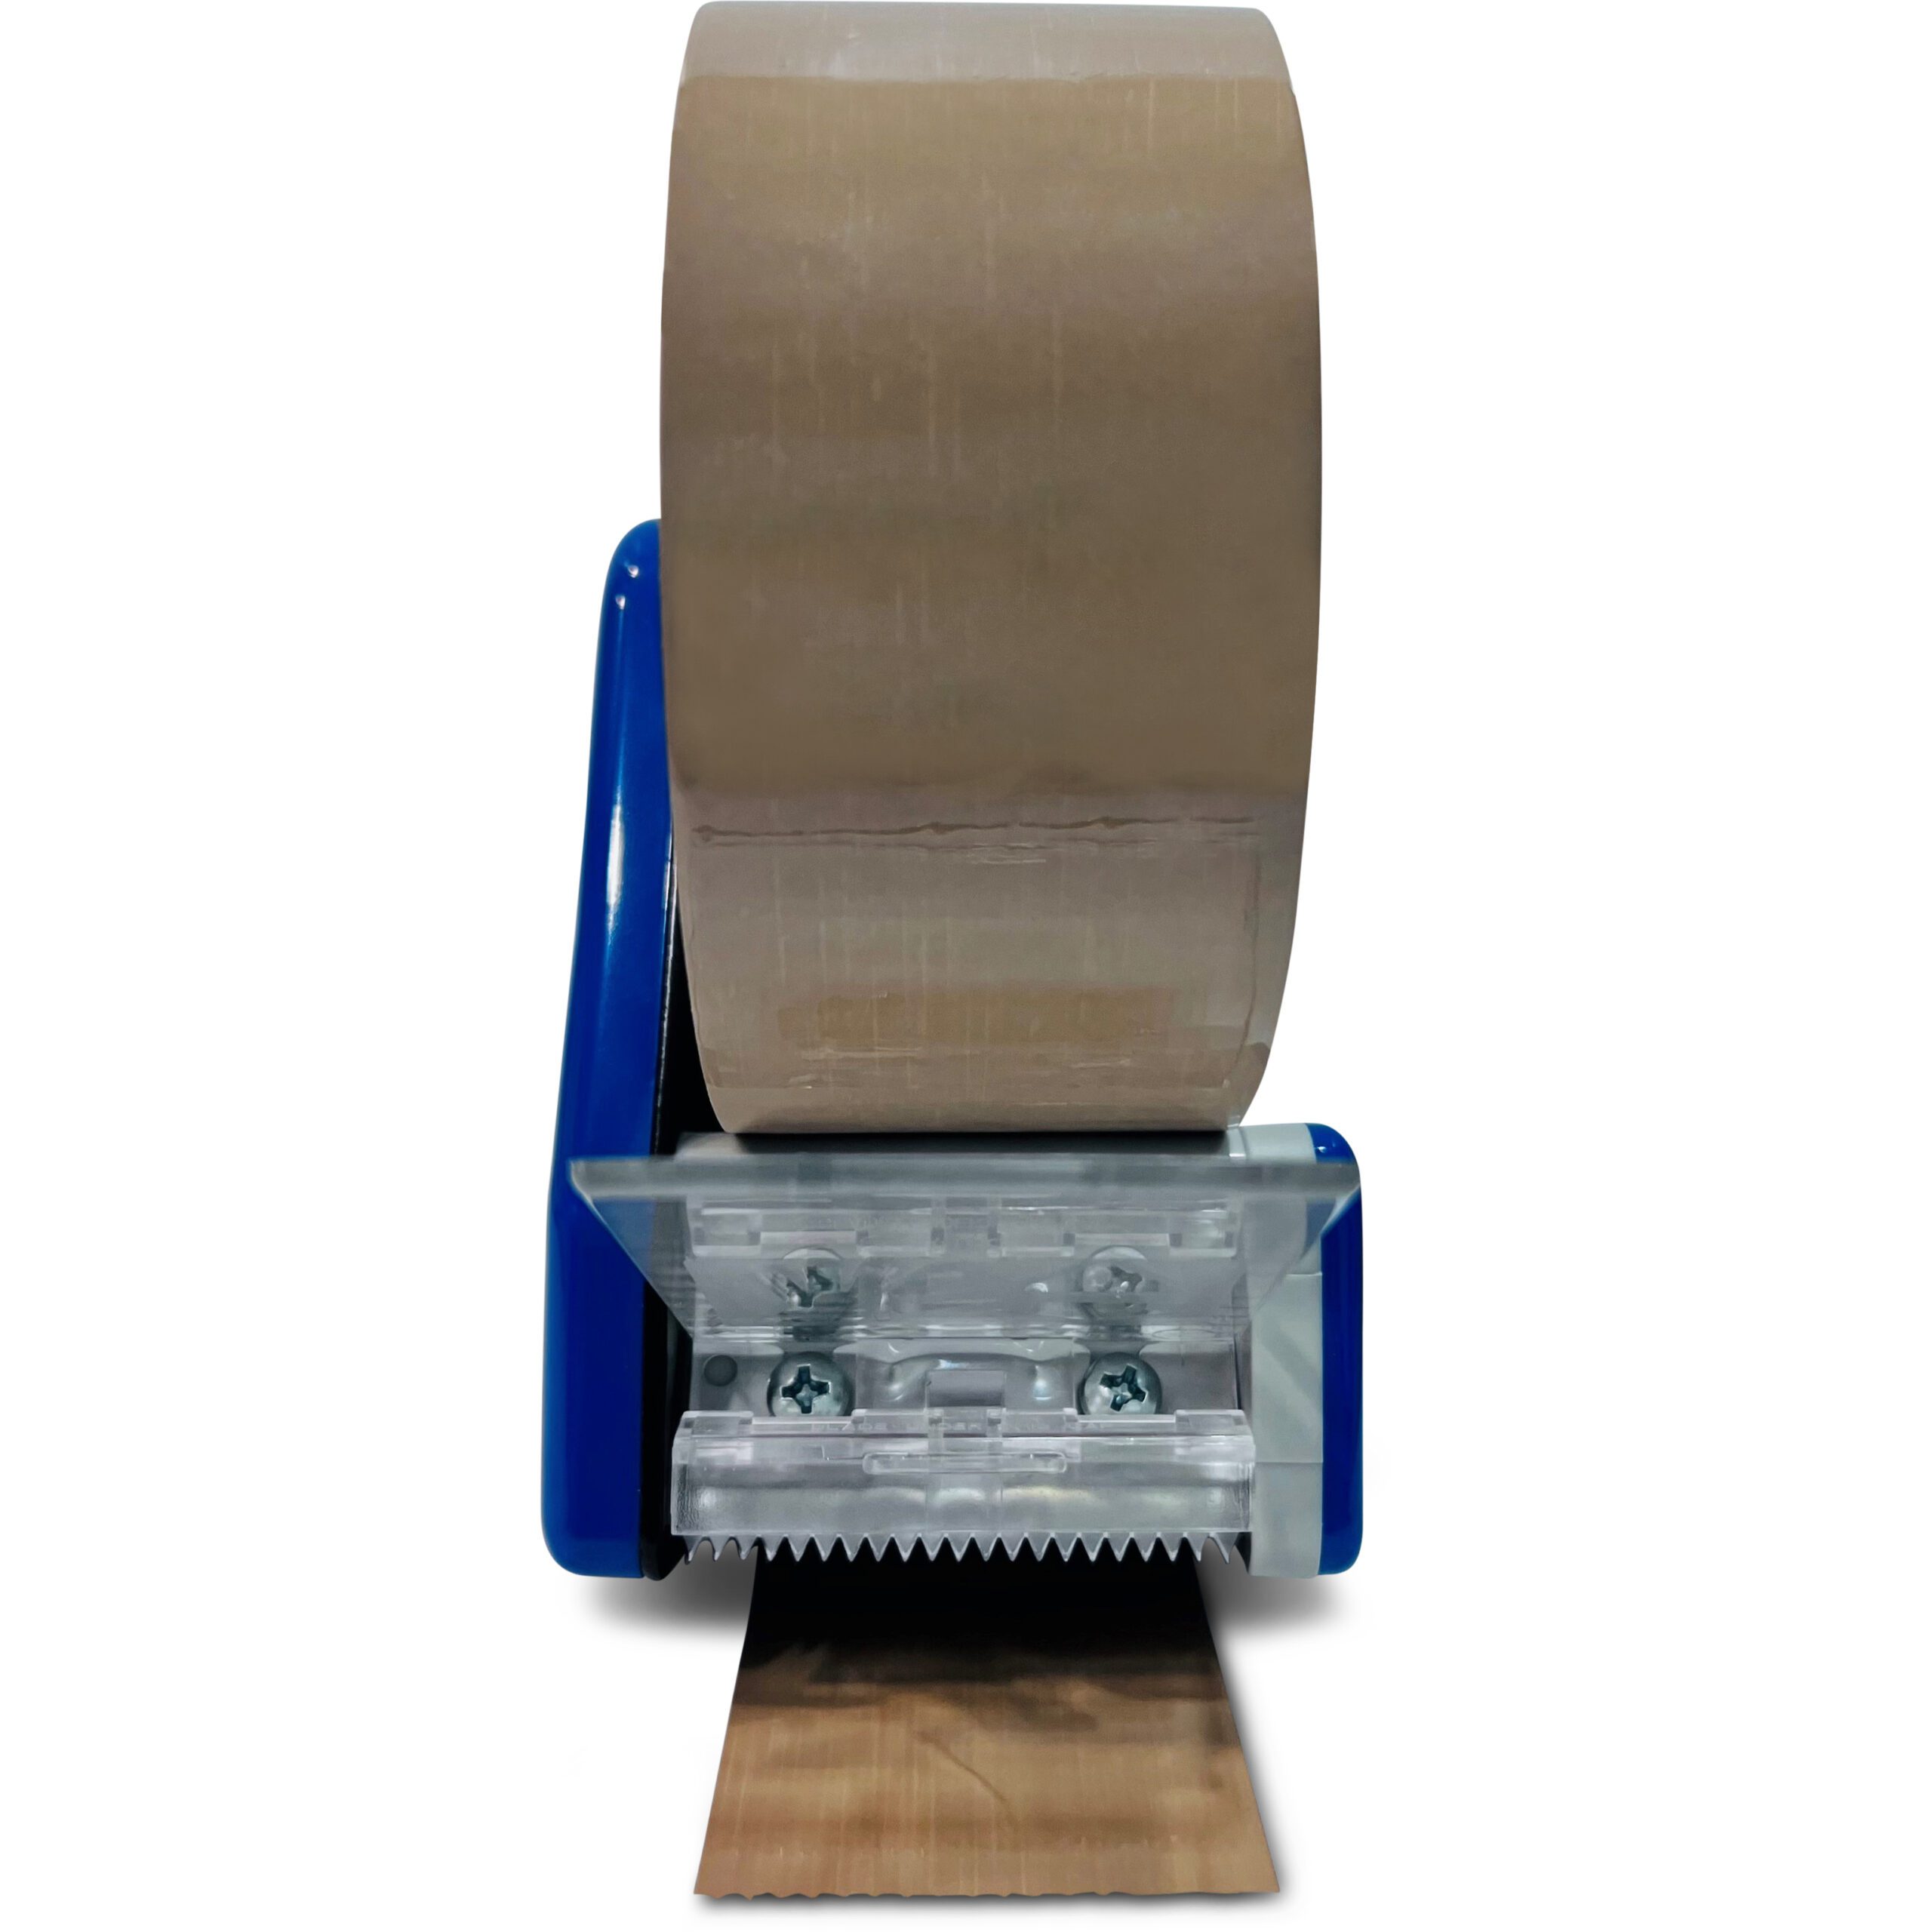 Double-sided Tape Dispensers - Venus Packaging